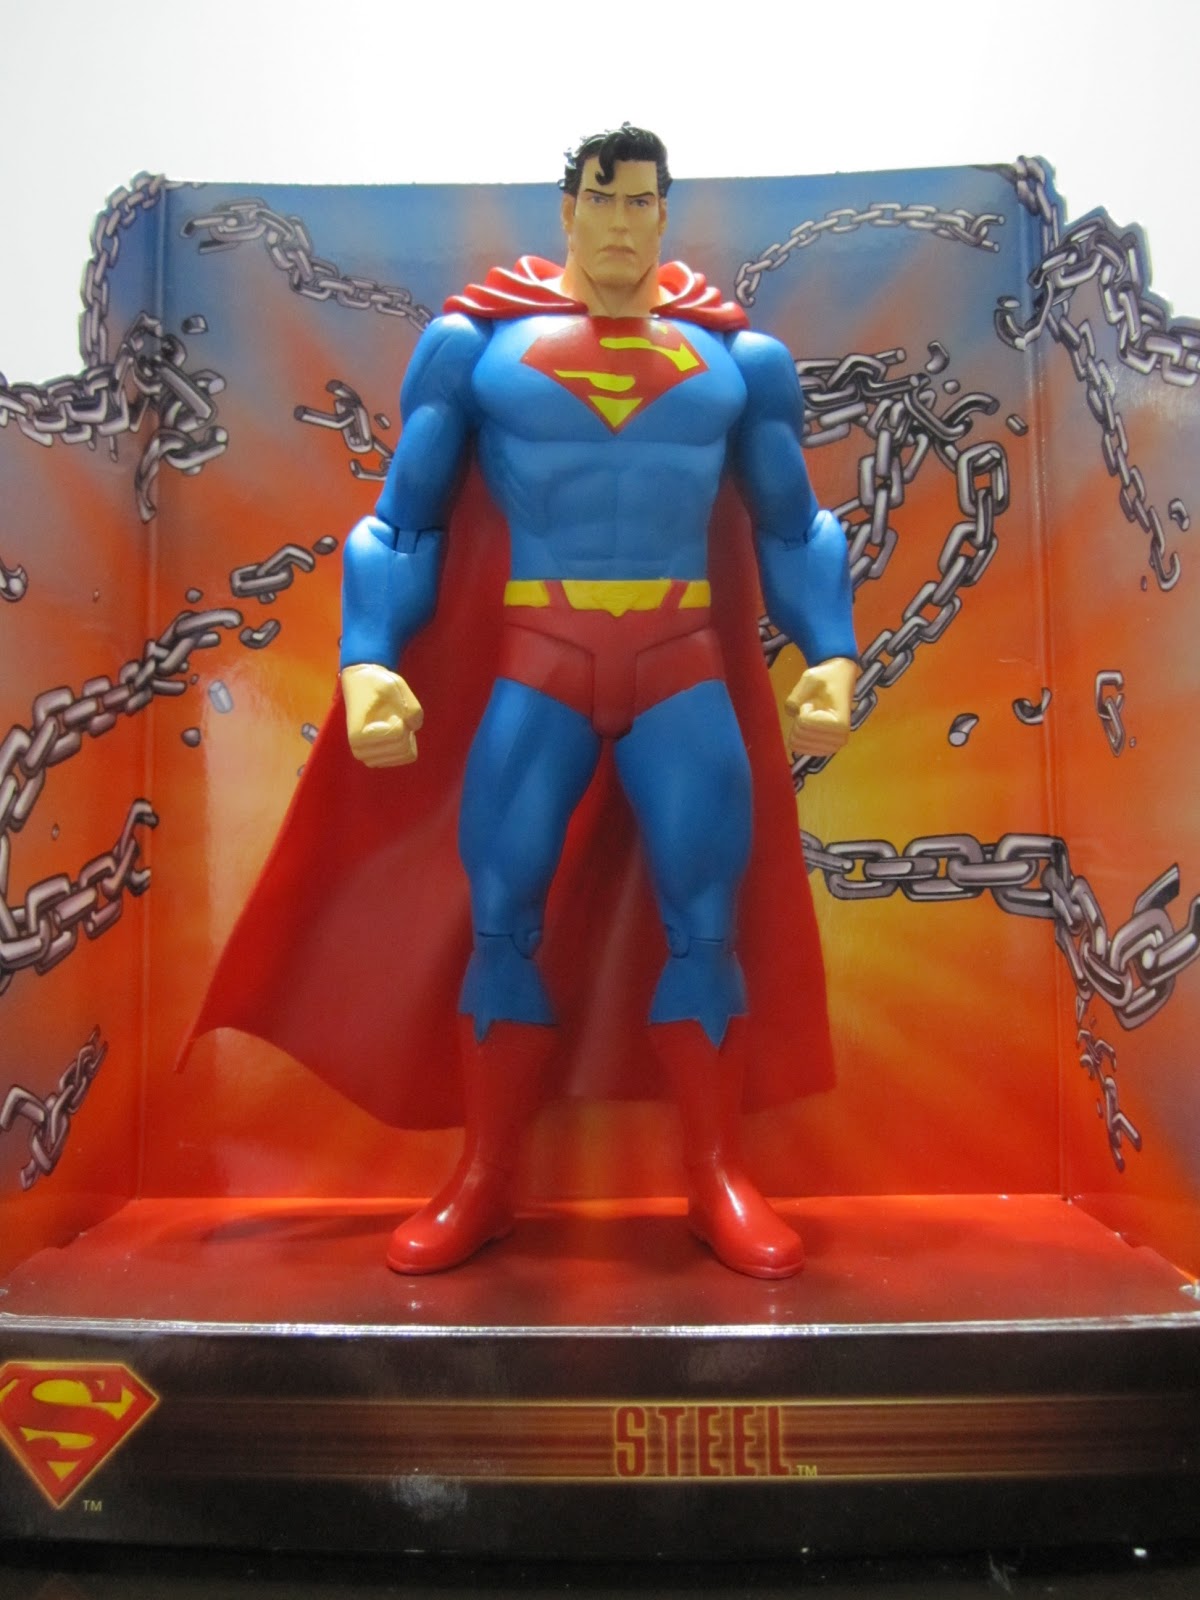 DC Direct Superman Last Son Series 1 Action Figure 2007 Christopher Reeves RARE for sale online 